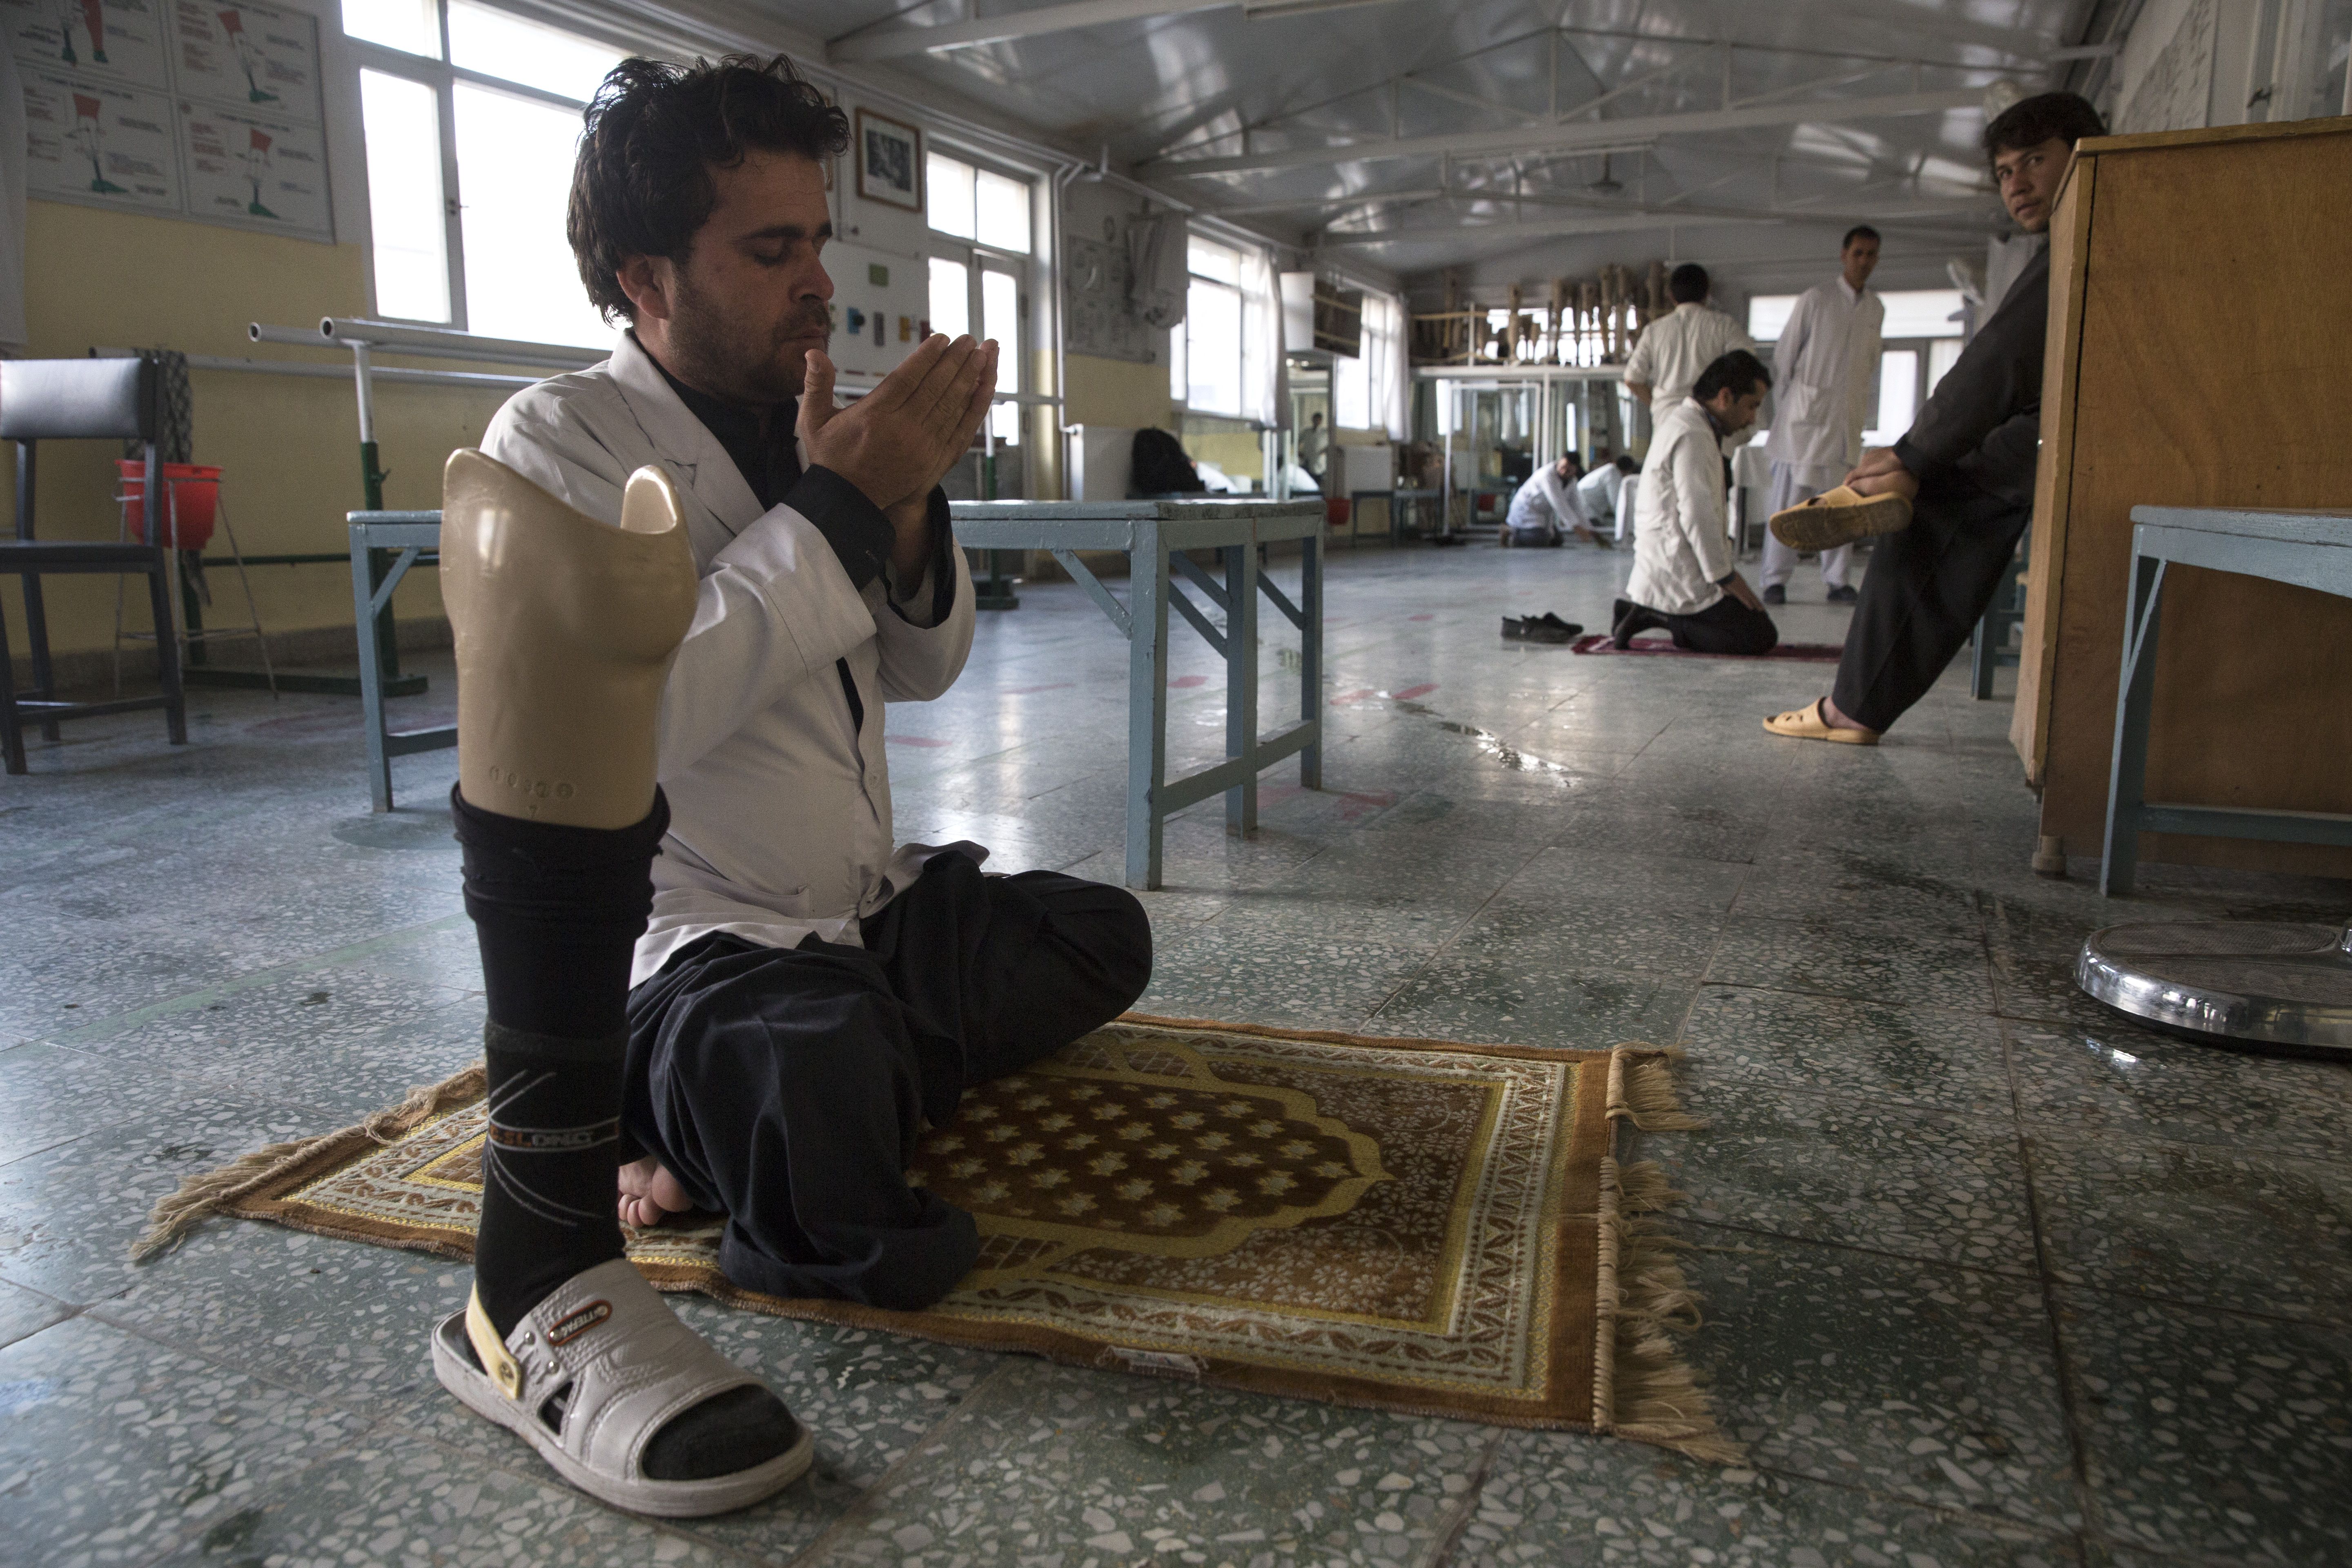 At the orthopedic center, a handicapped employee prays after finishing his duties. Image by Paula Bronstein. Afghanistan, 2015. 